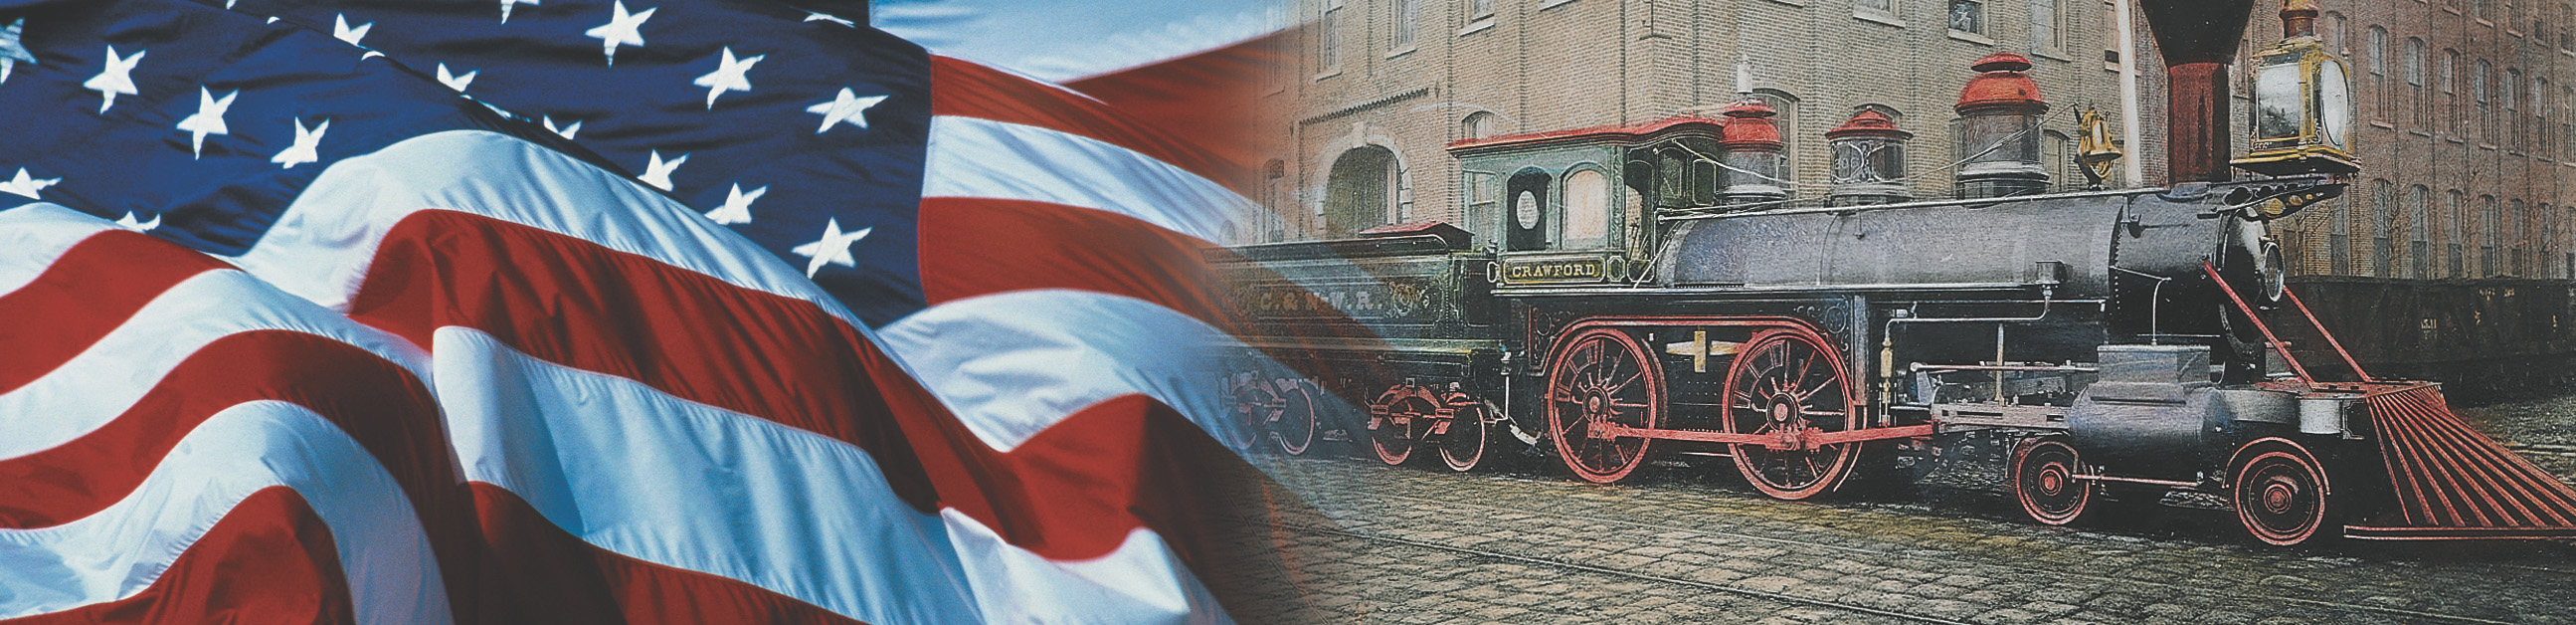 Banner: an American flag and a photo of a train.